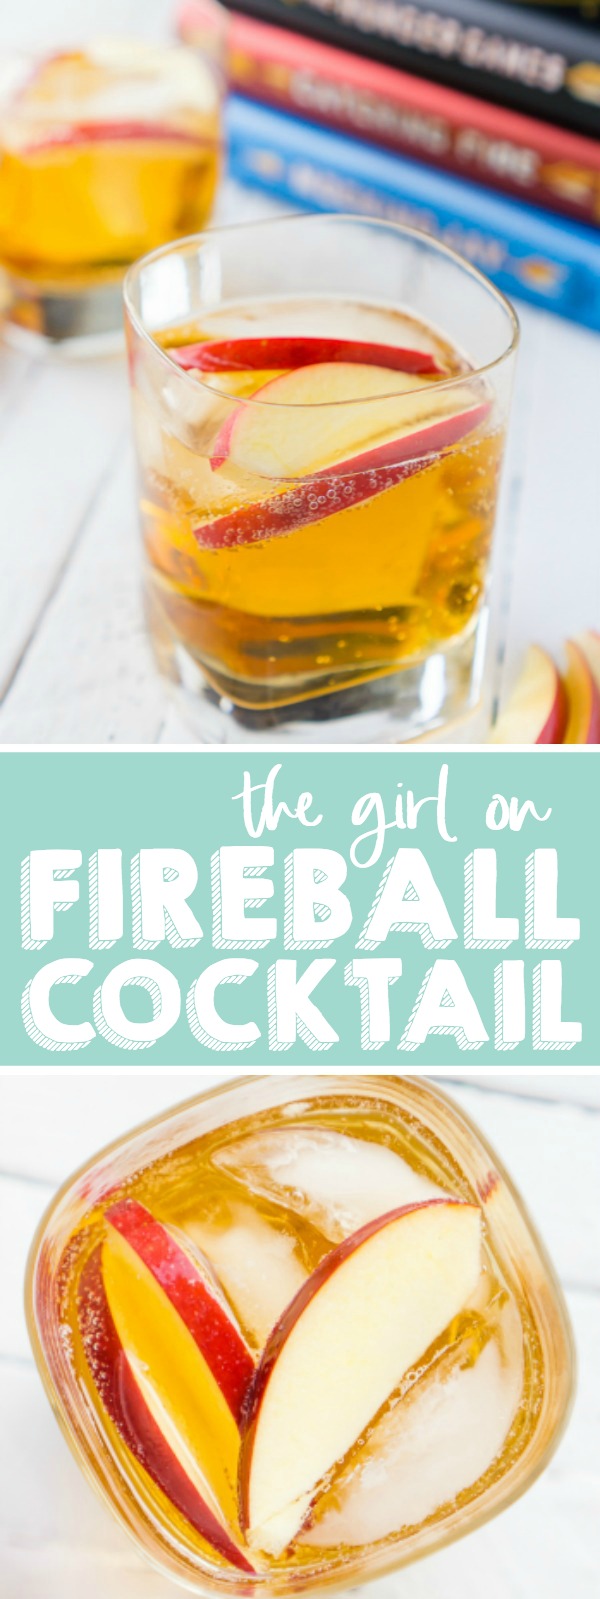 Celebrate Katniss Everdeen with this Hunger Games inspired cocktail - The Girl on Fireball Cocktail! OR just celebrate your love of perfect fall cocktail recipes and combine spiced Fireball Whiskey with tasty cider! | THE LOVE NERDS #fireballwhiskey #fallcocktail 